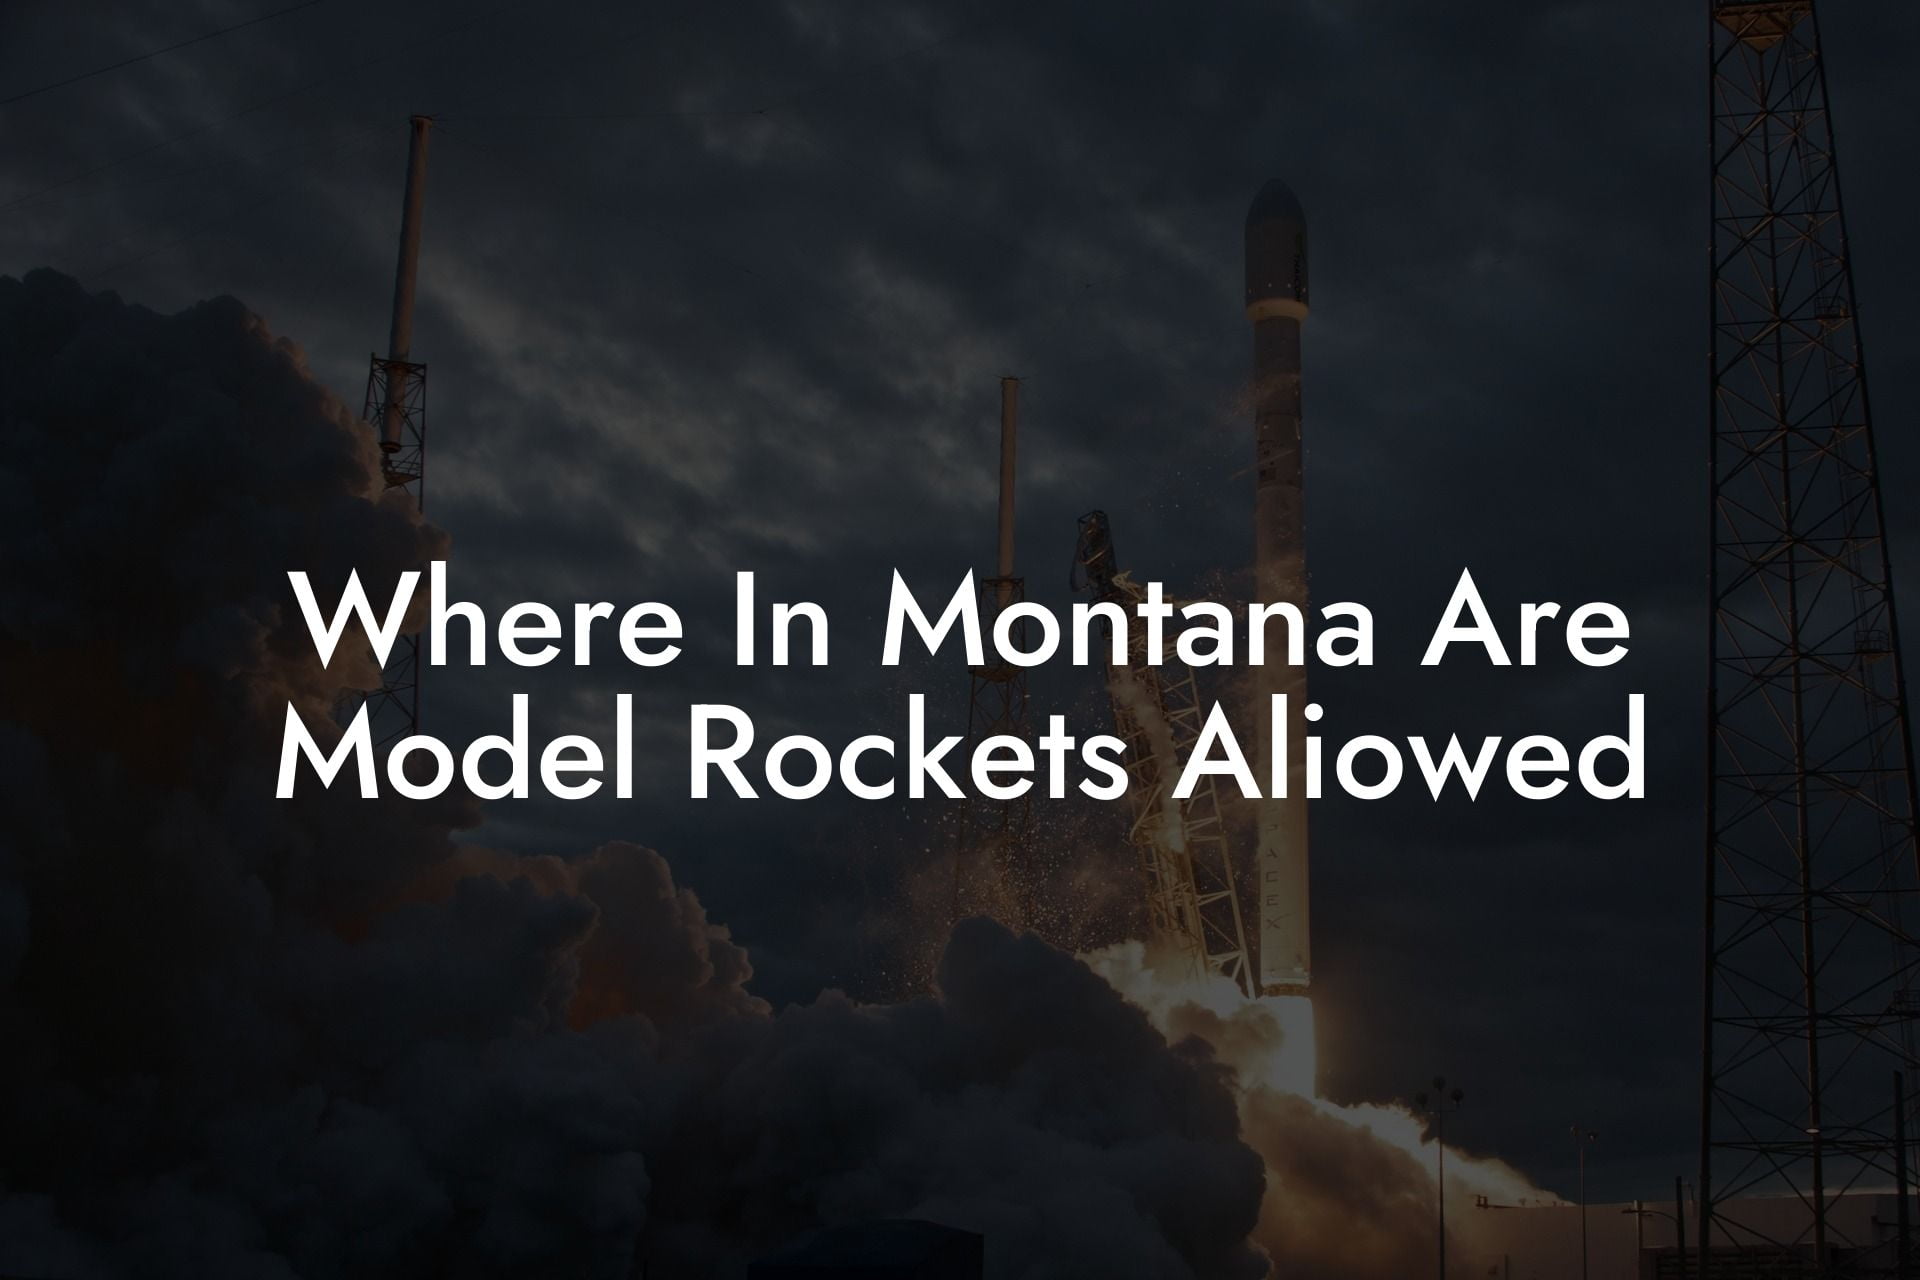 Where In Montana Are Model Rockets Aliowed